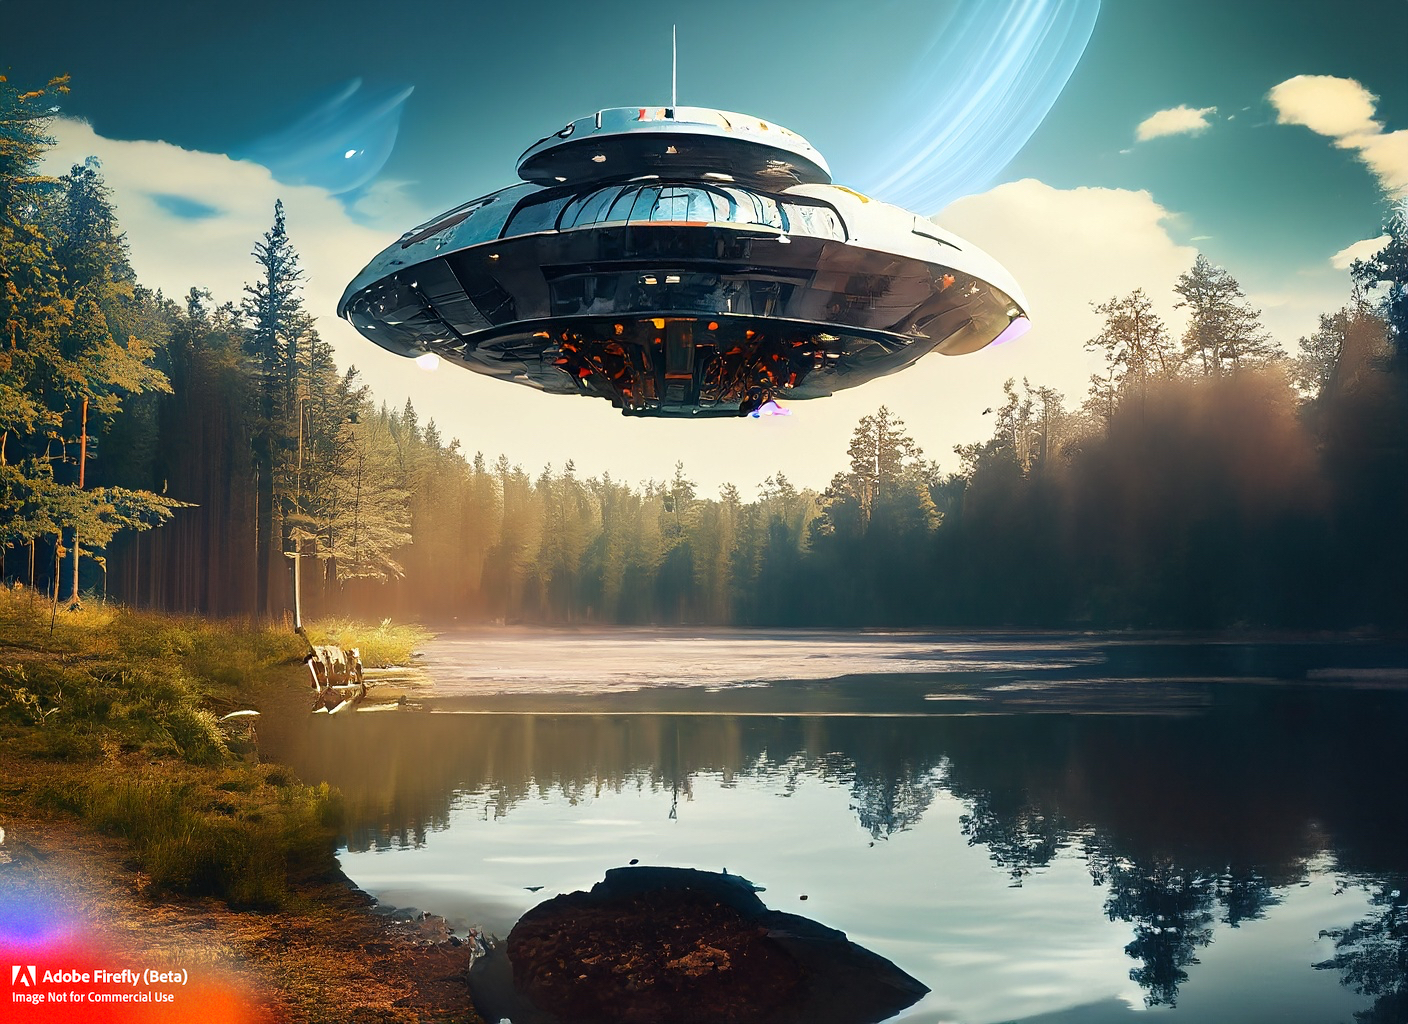 Firefly spaceship hovering in the Scandinavian forest sunny sky spaces